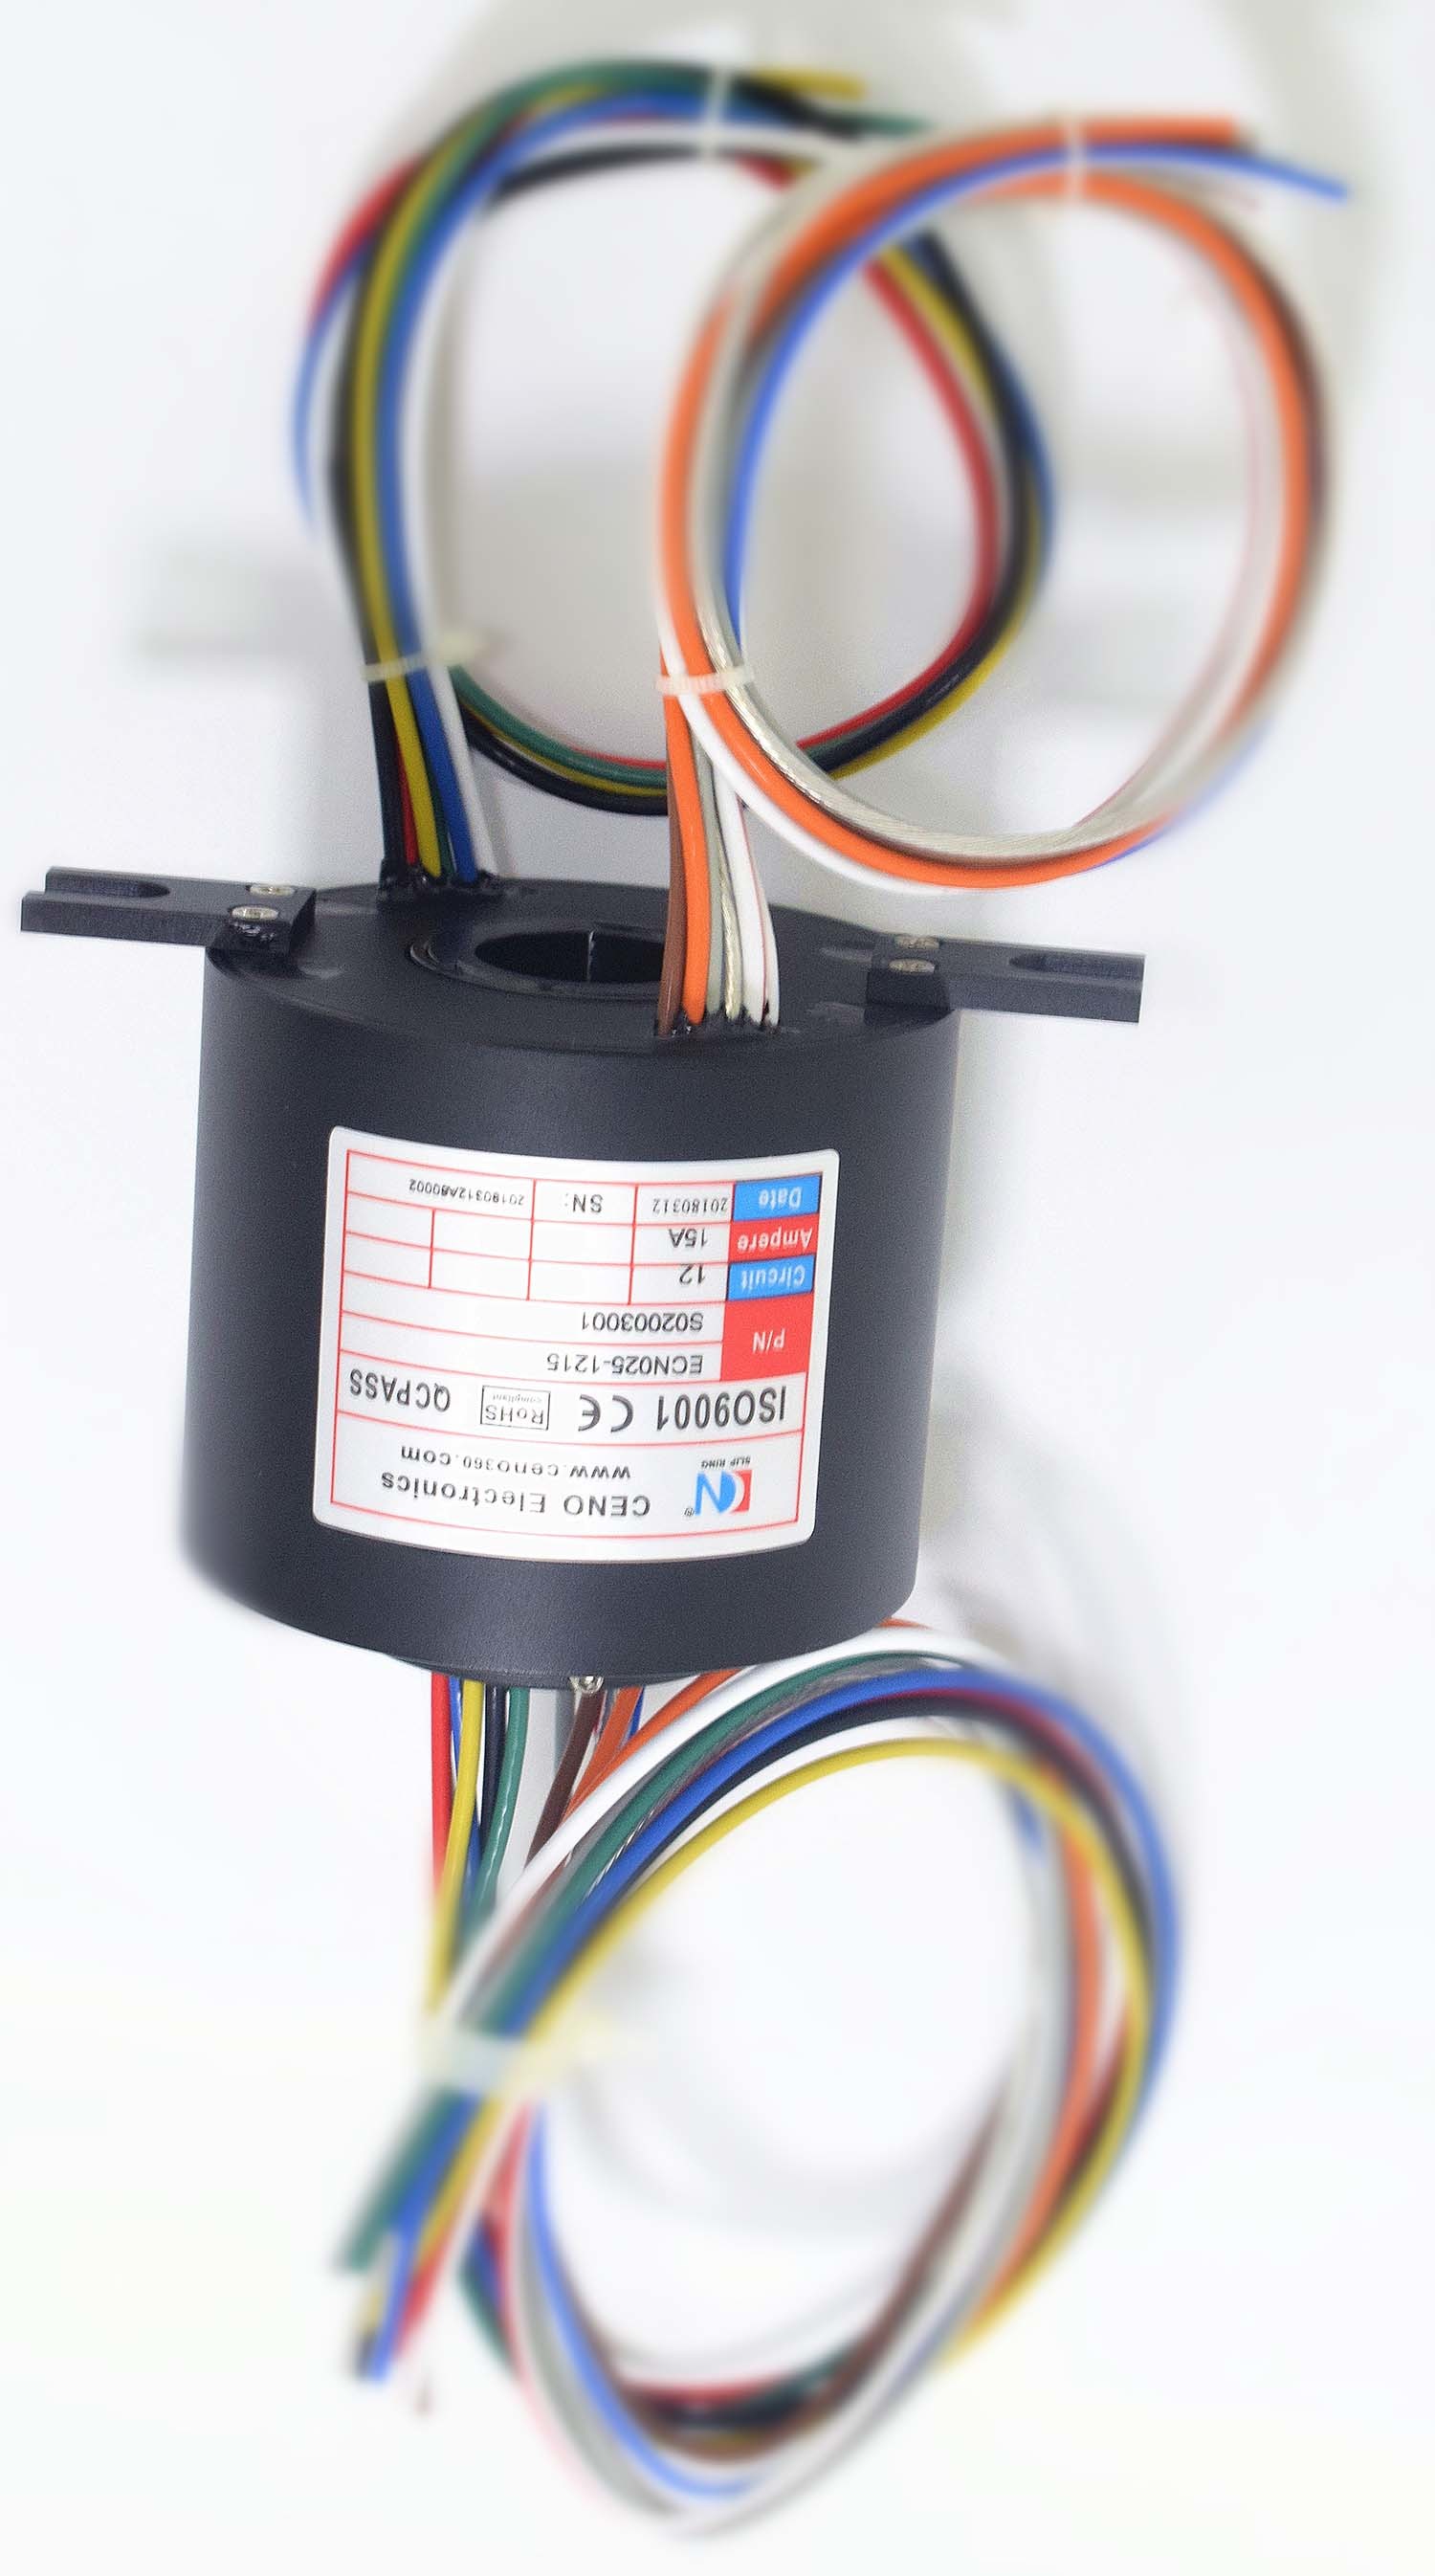  Profi Bus Rotating Electrical Connector Slip Ring And Current Could Be Integrated Manufactures